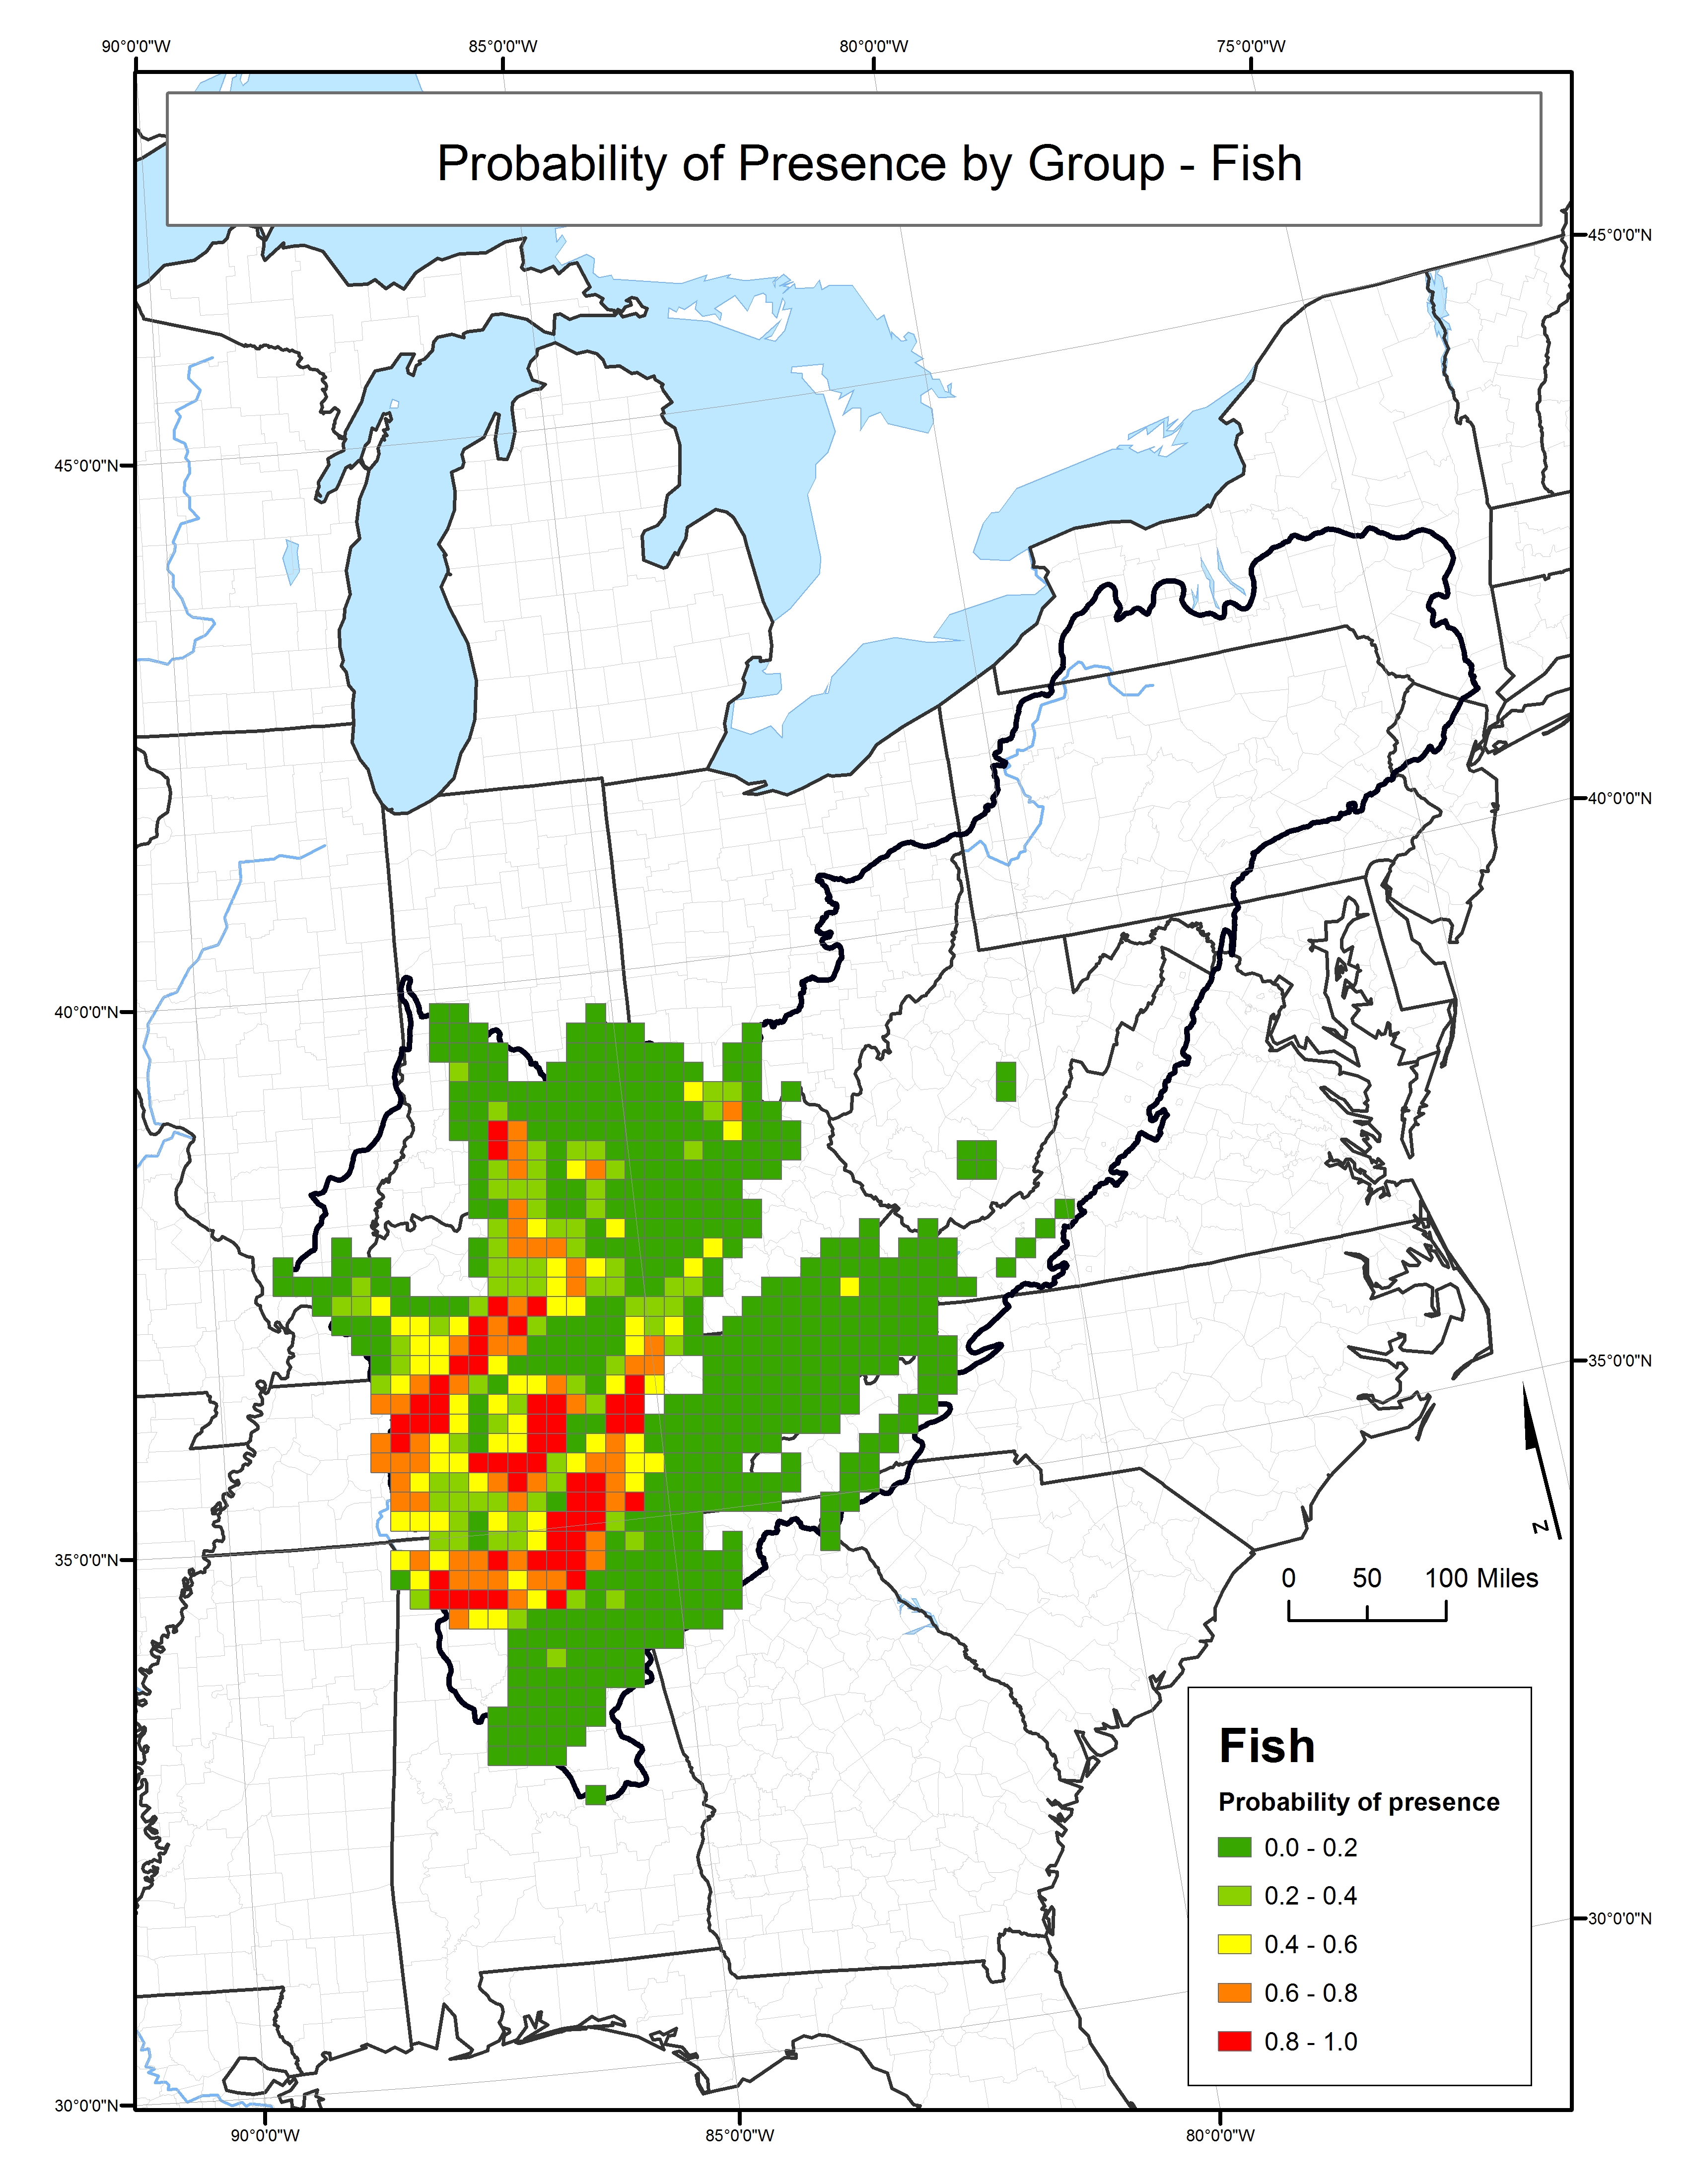 Probability of Presence for Fish